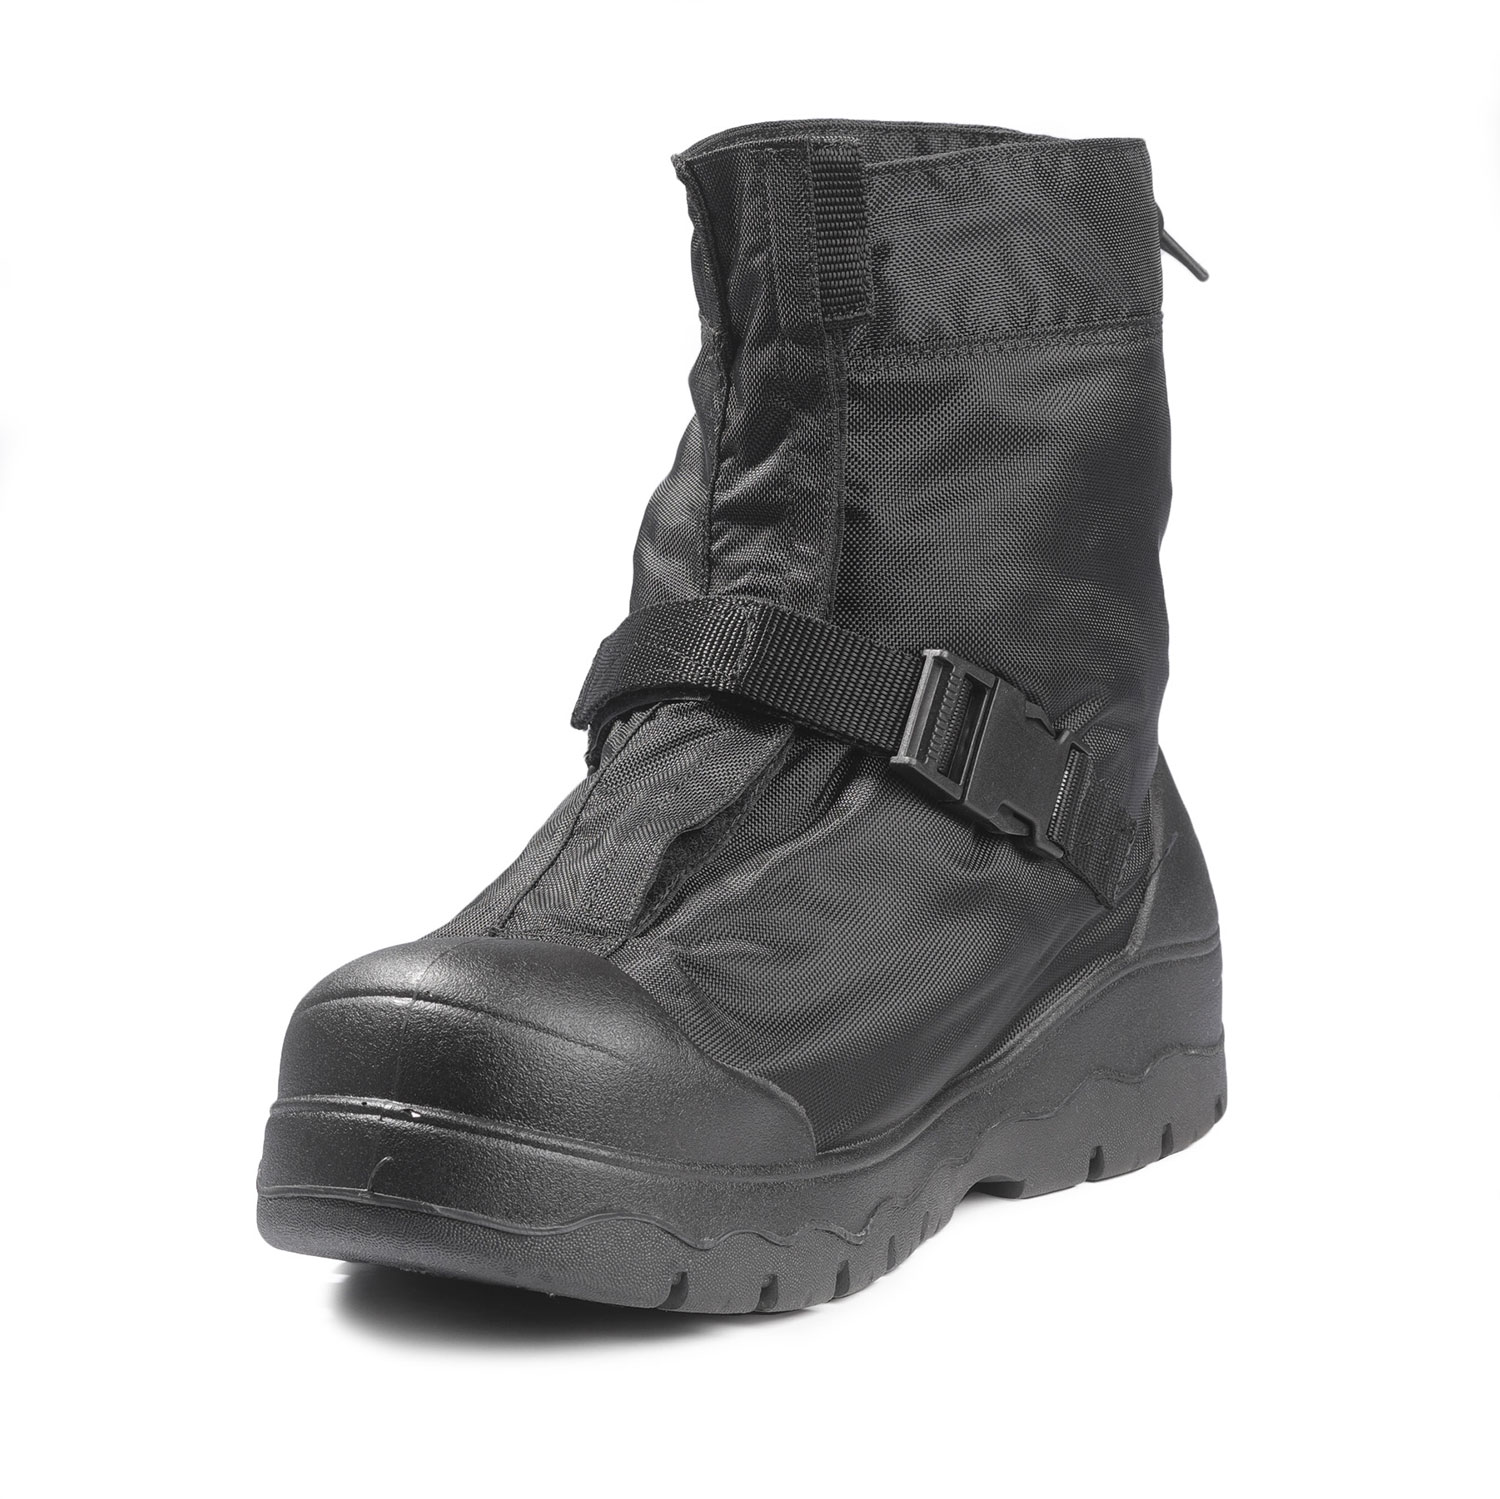 Tingley Orion 14in. Waterproof Overshoe Non-Insulated